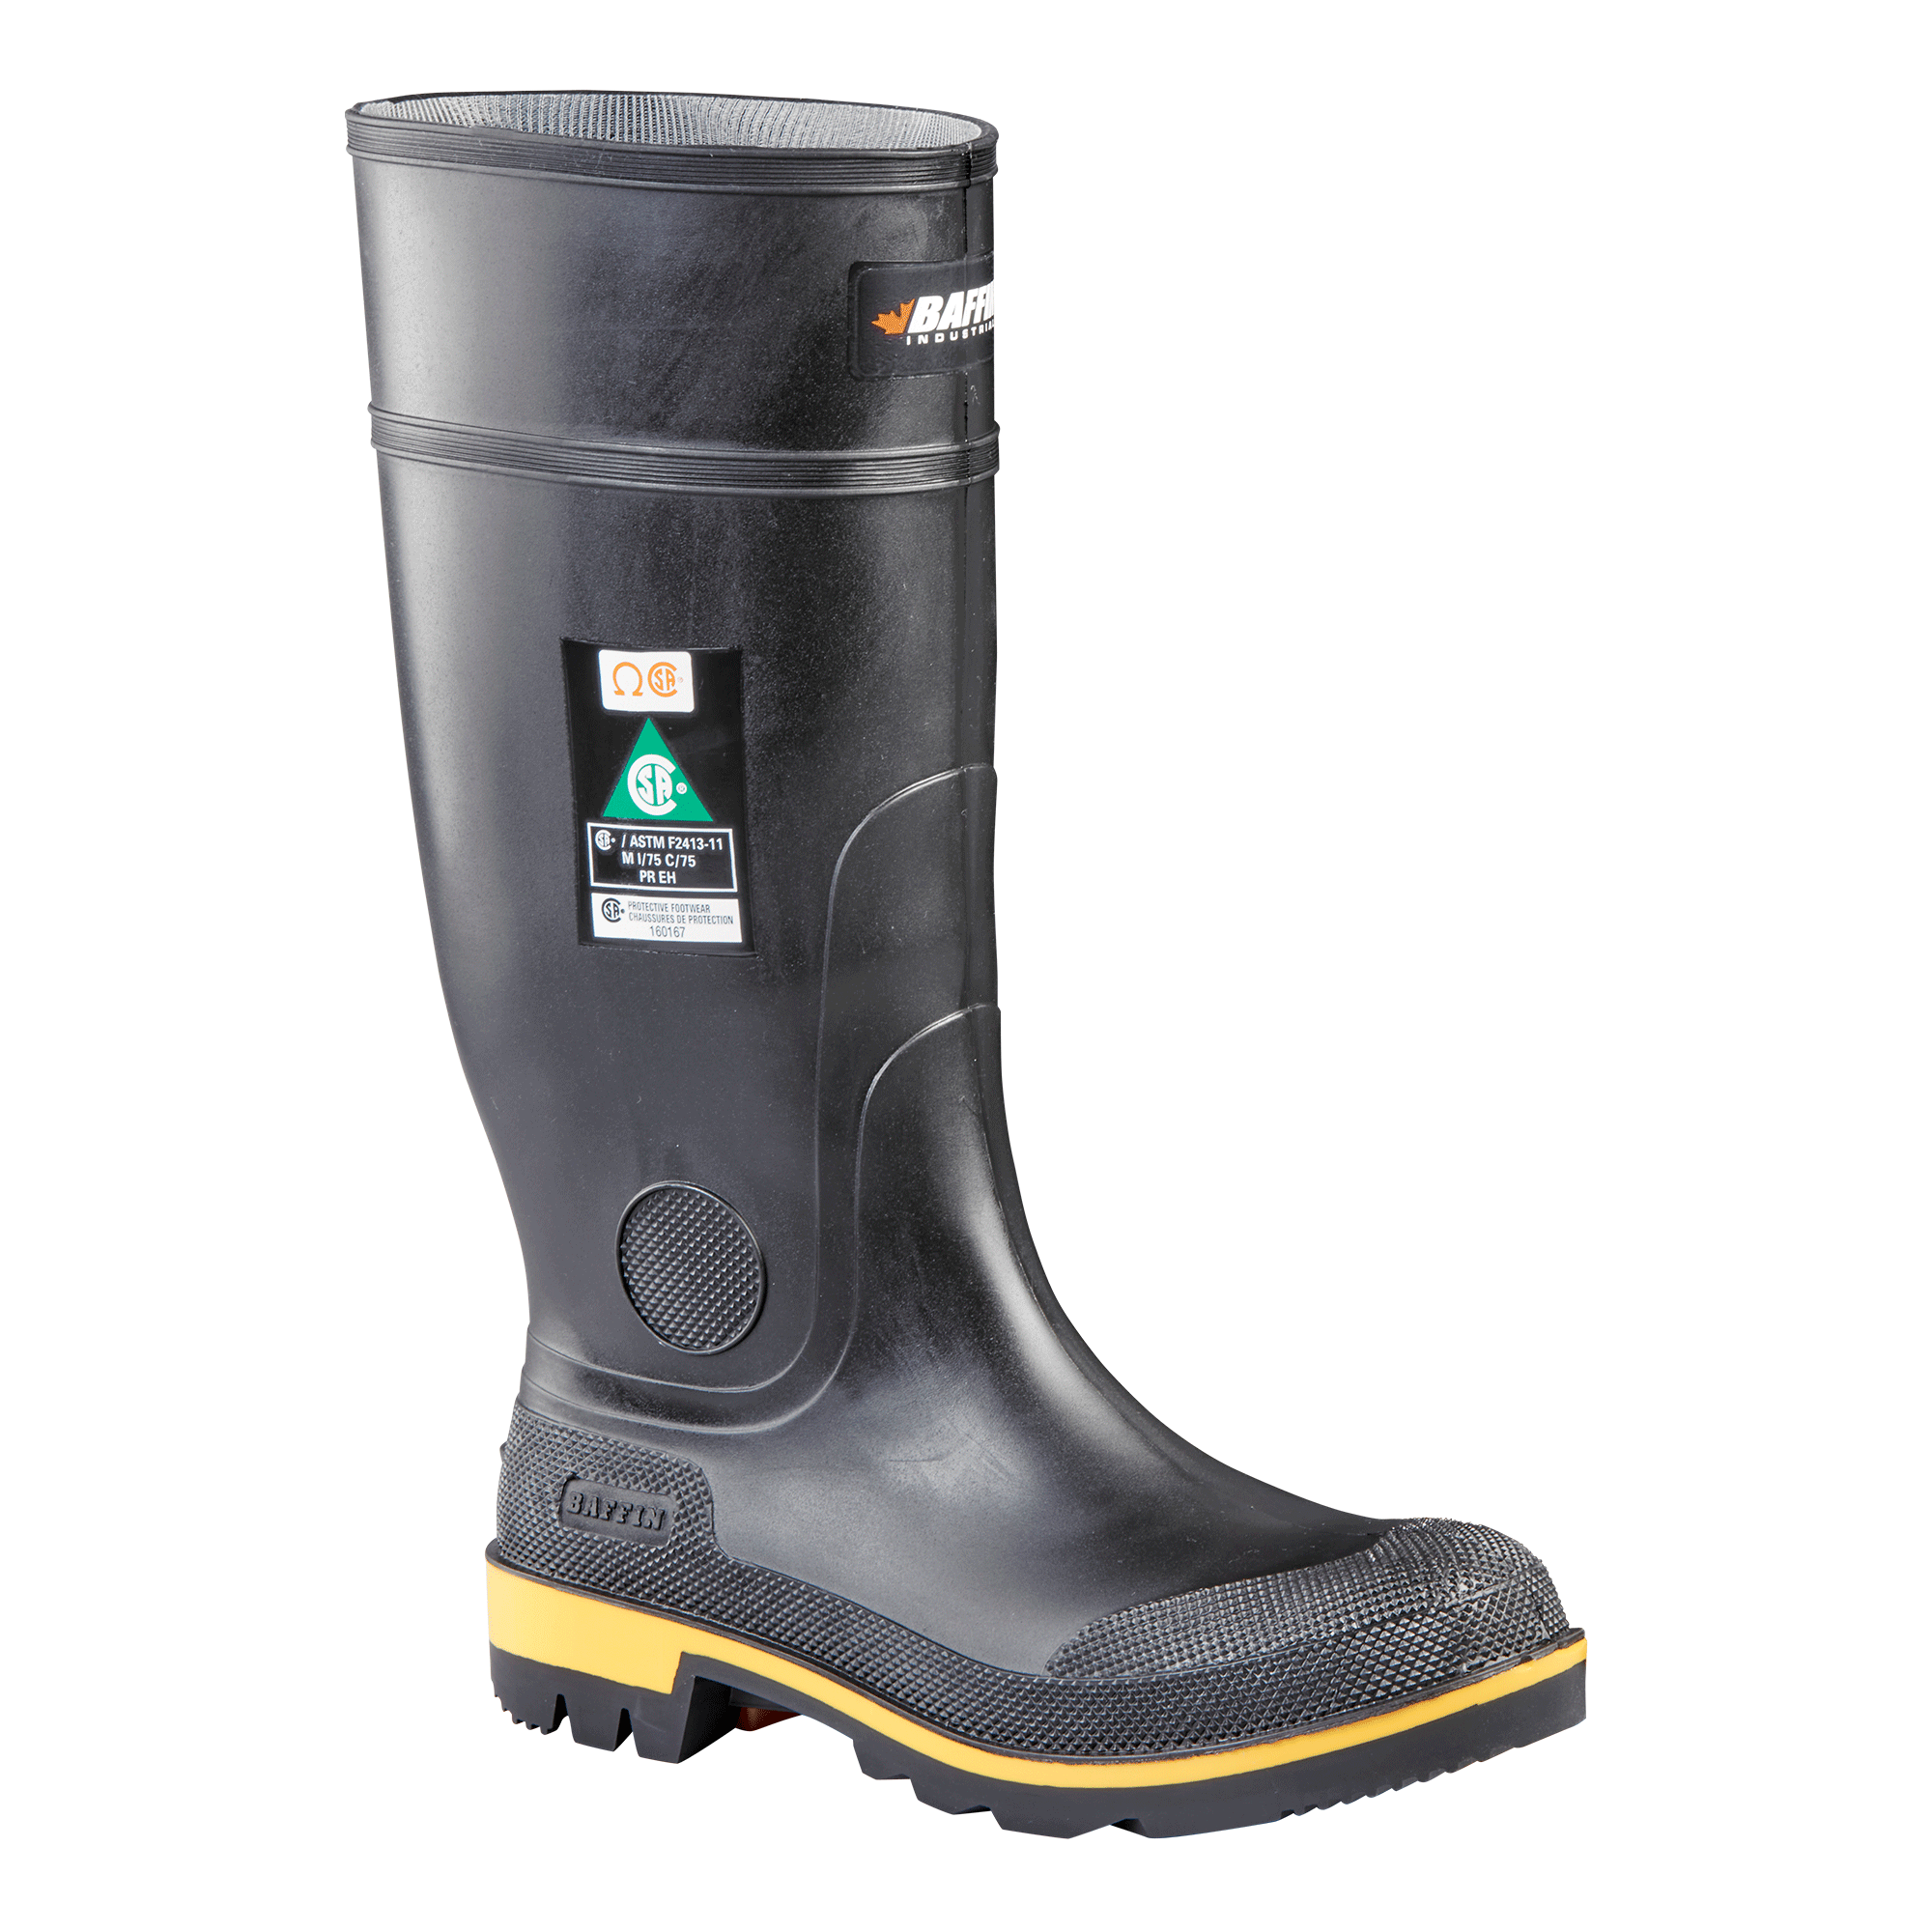 MAXIMUM (Safety Toe & Plate) | Men's Boot – Baffin - Born in the North '79